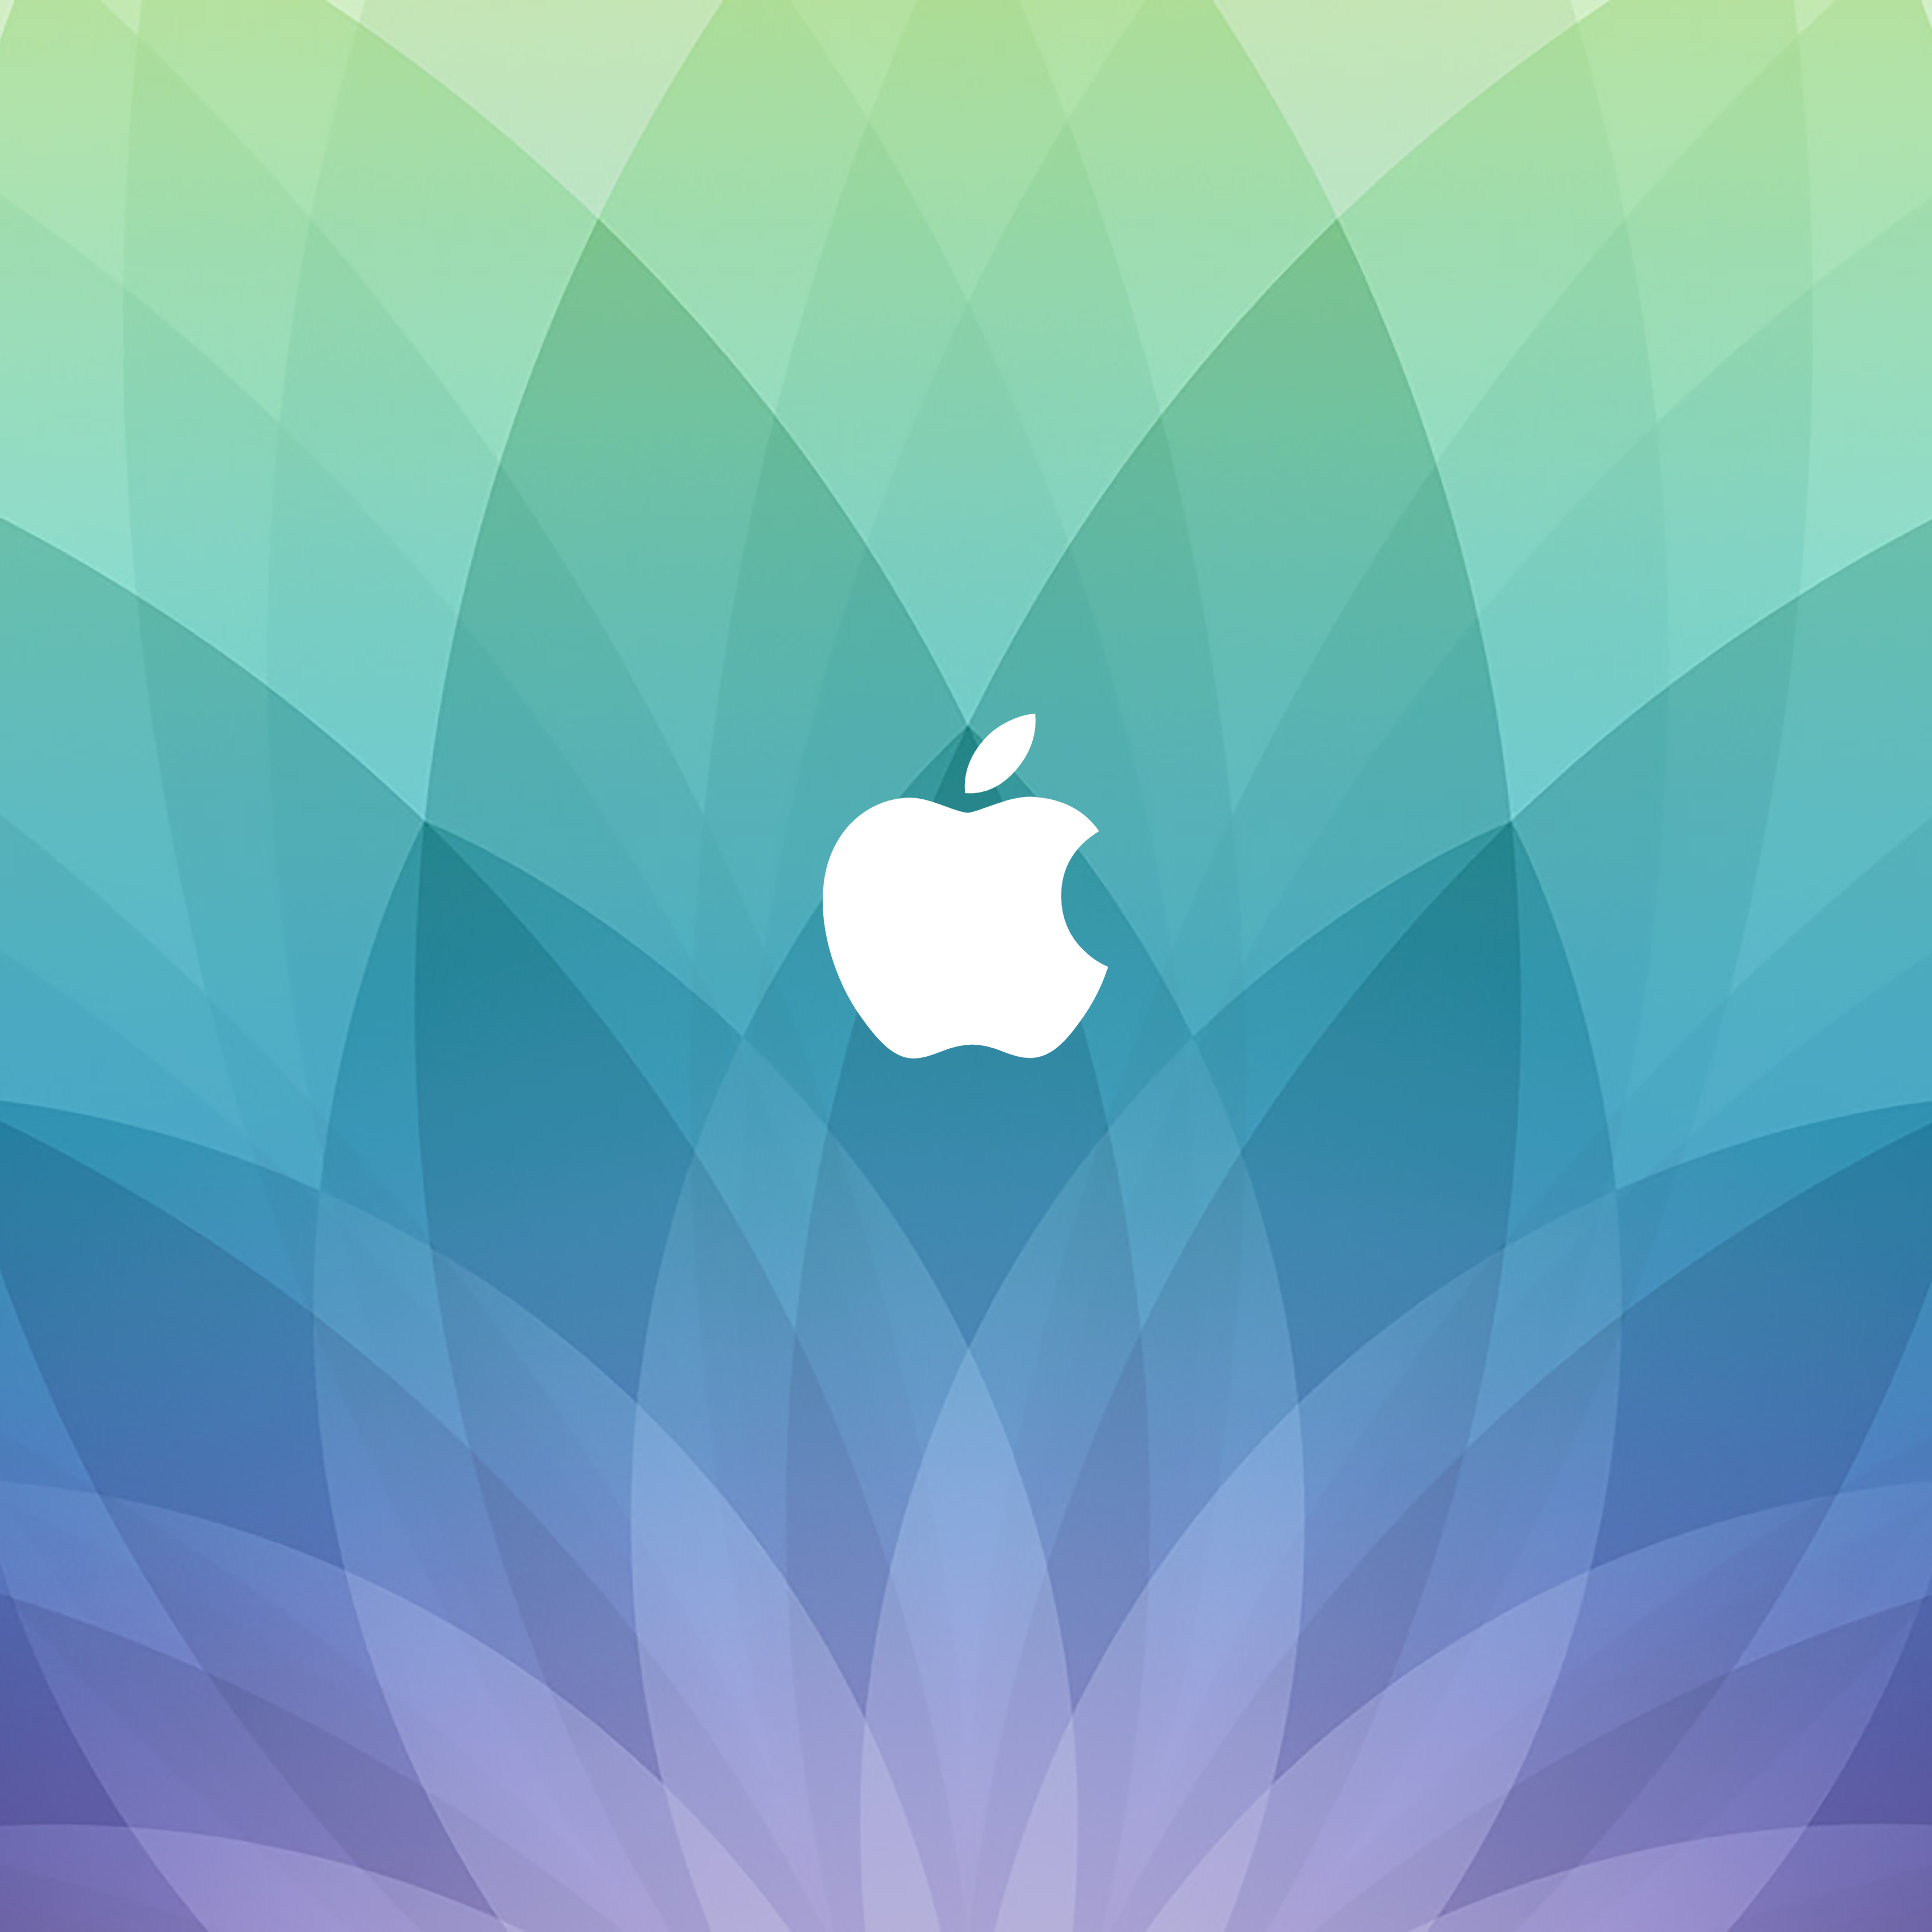 Apple Watch event wallpapers: Spring Forward